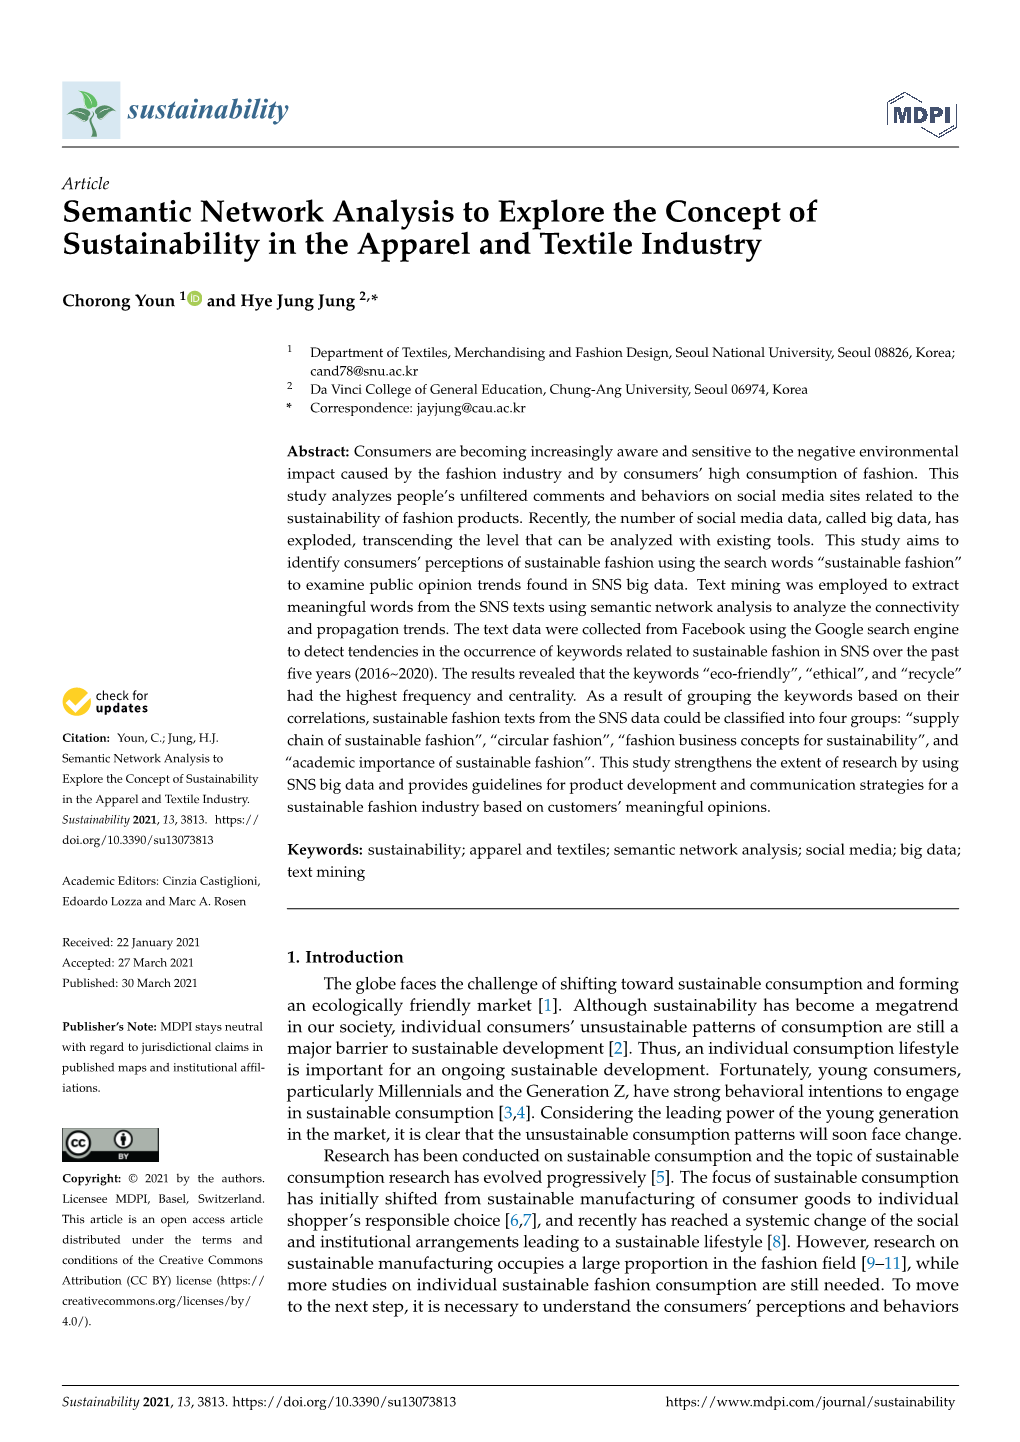 Semantic Network Analysis to Explore the Concept of Sustainability in the Apparel and Textile Industry